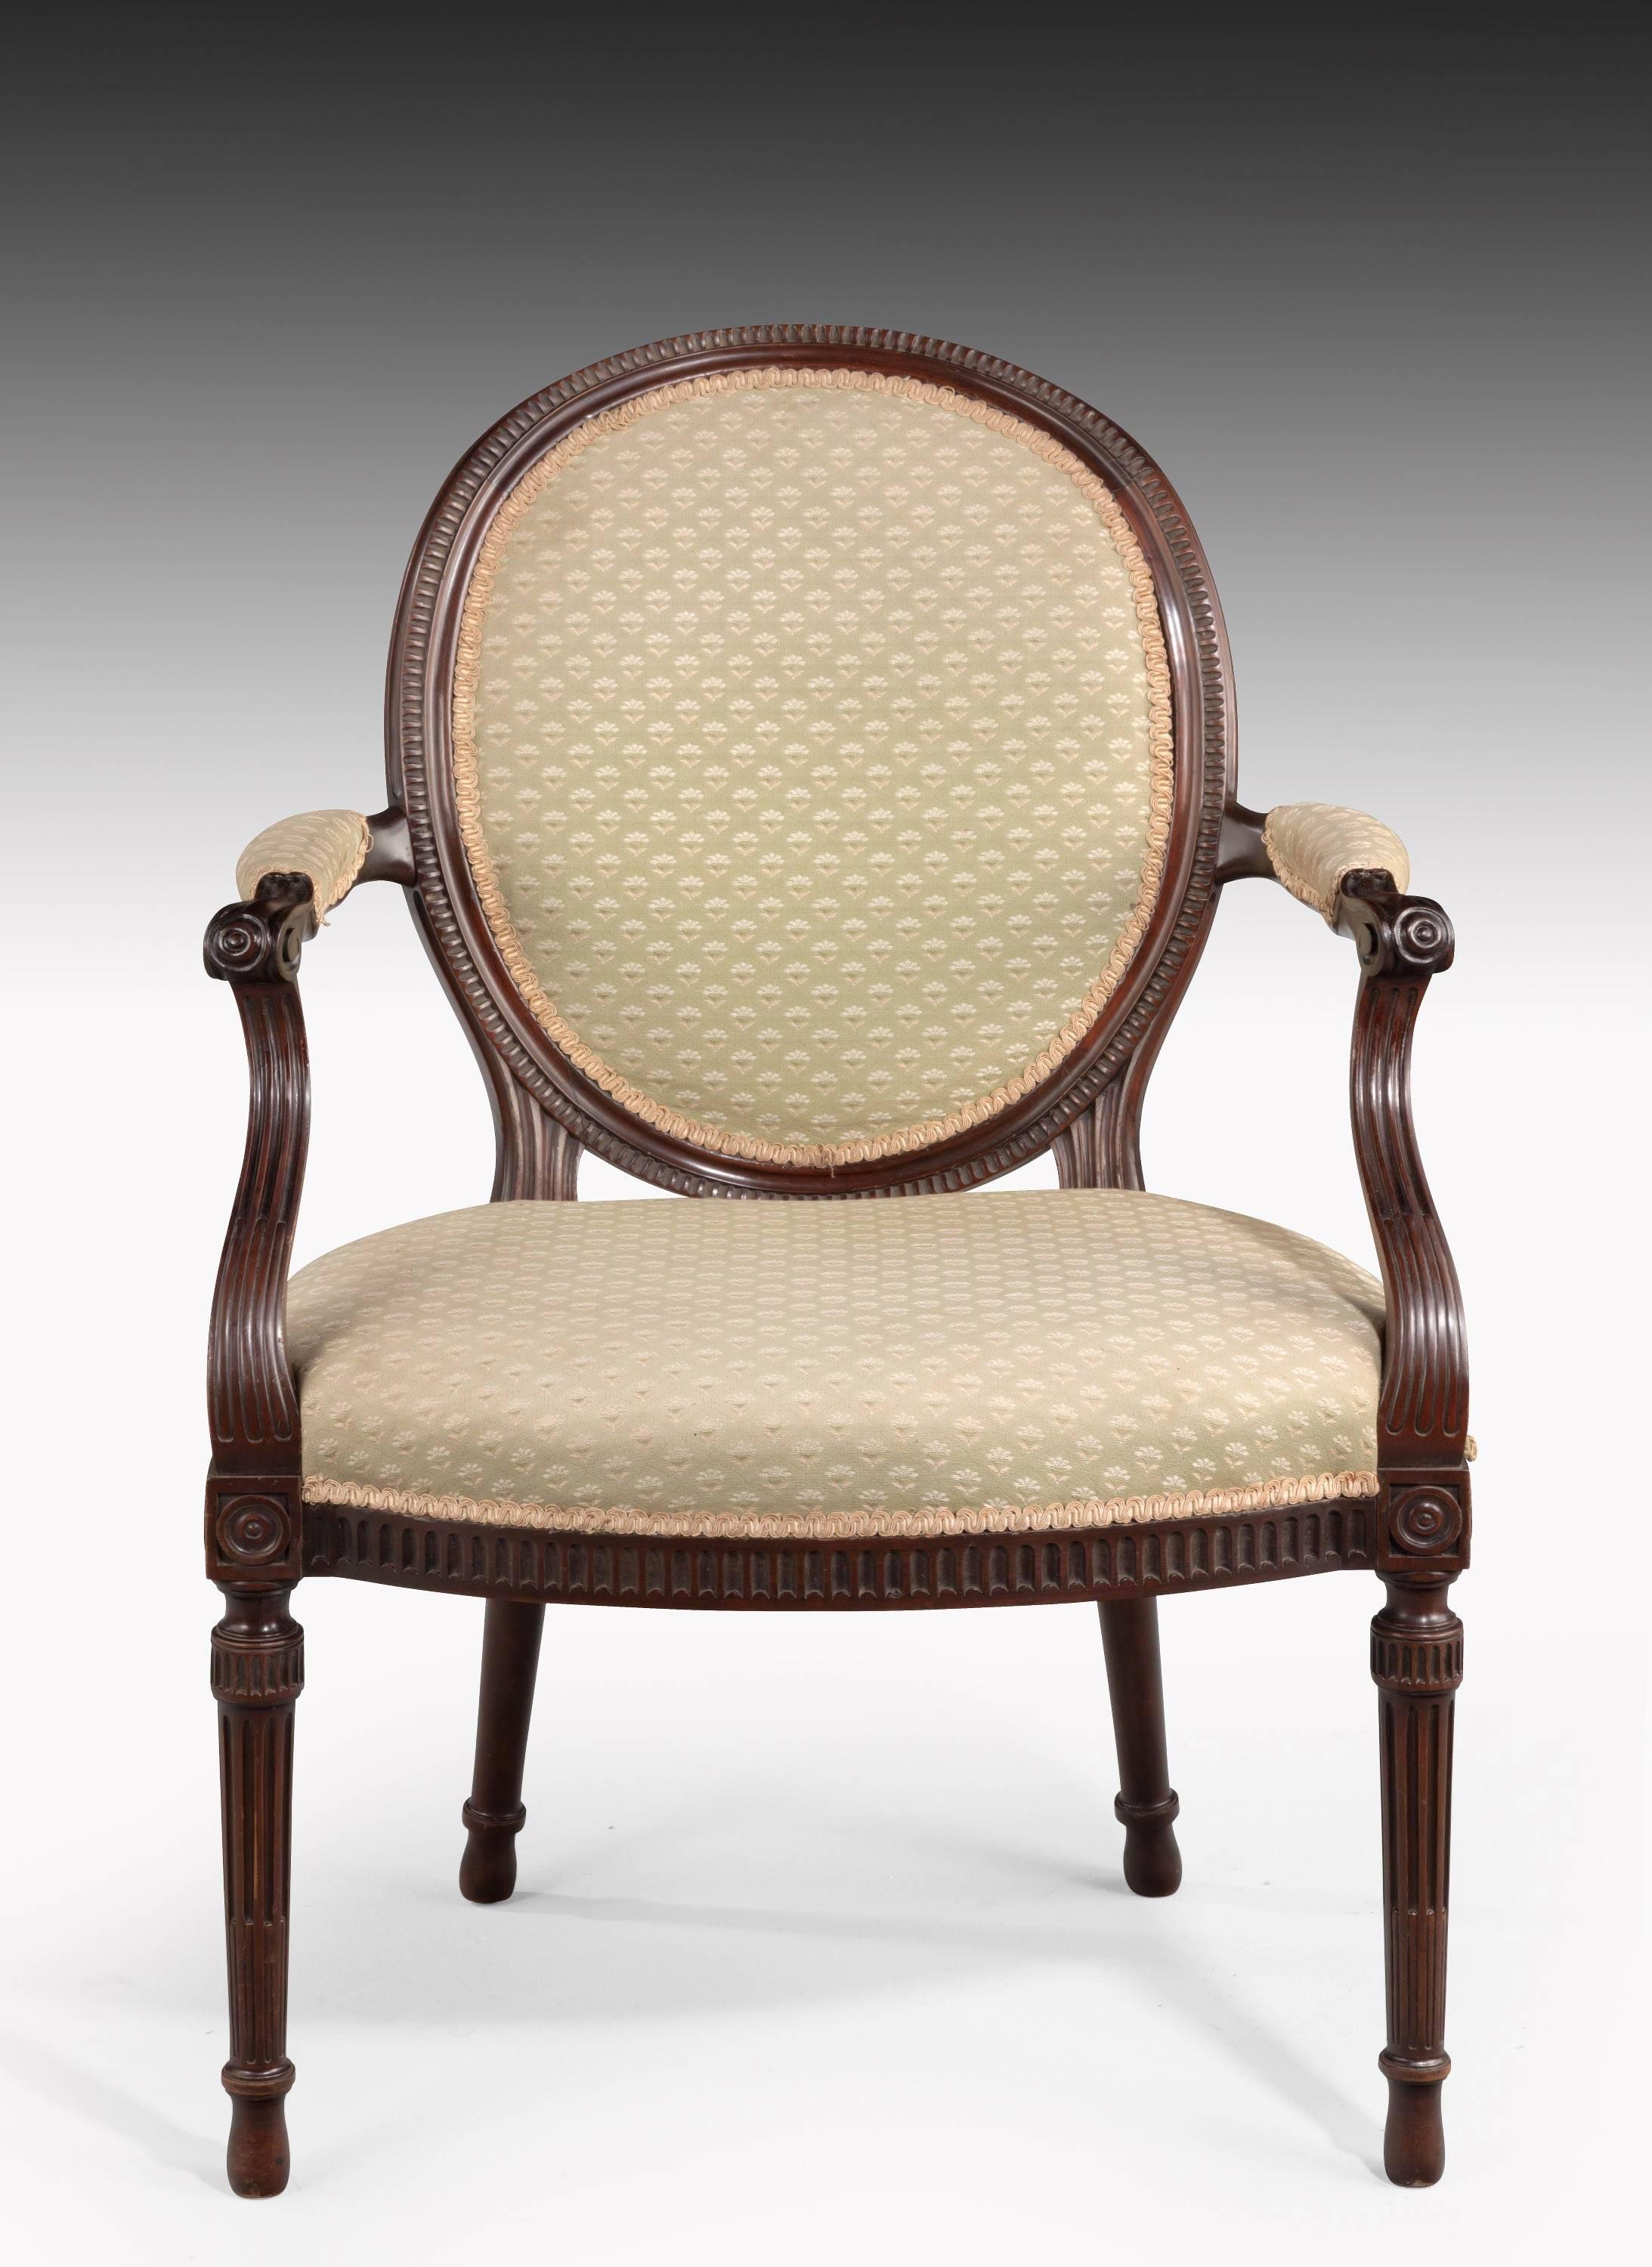 English Pair of George III Style Hepplewhite Elbow Chairs with Reeded Incised Decoration